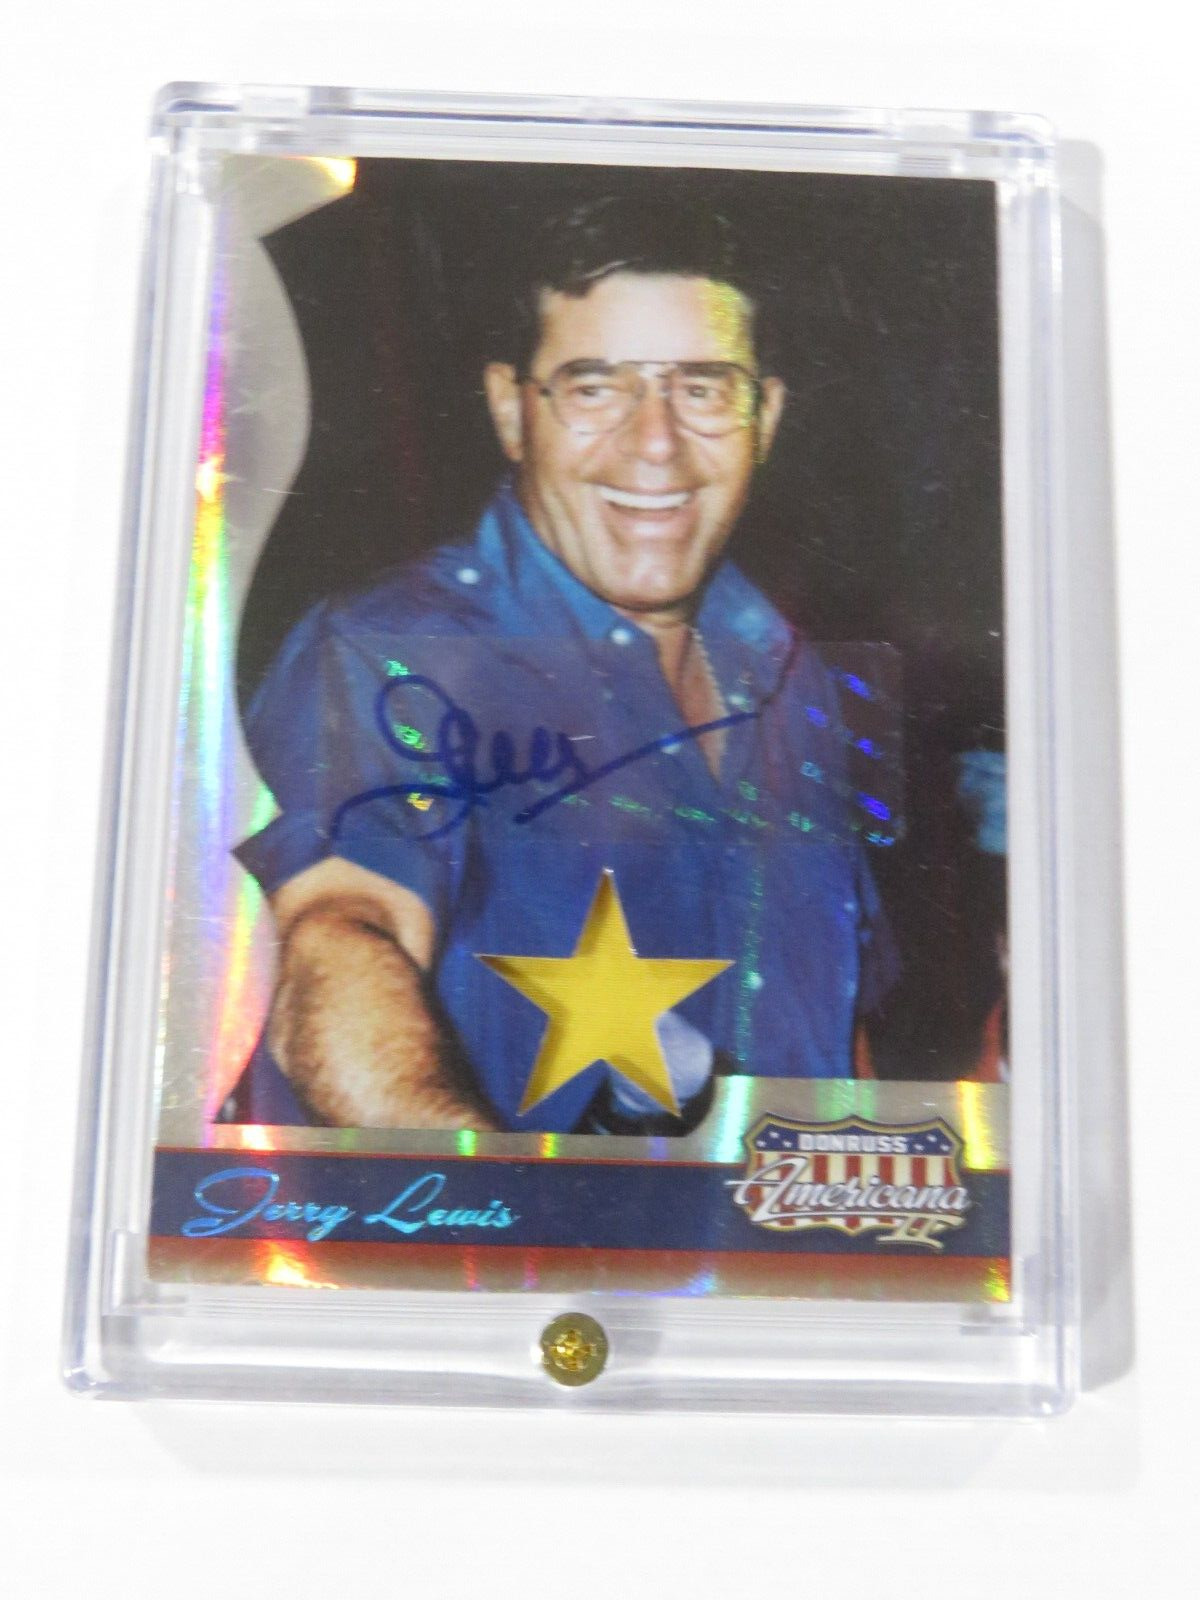 2008 Donruss fabric/signed card 16/50 JERRY LEWIS AUTOGRAPH CARD